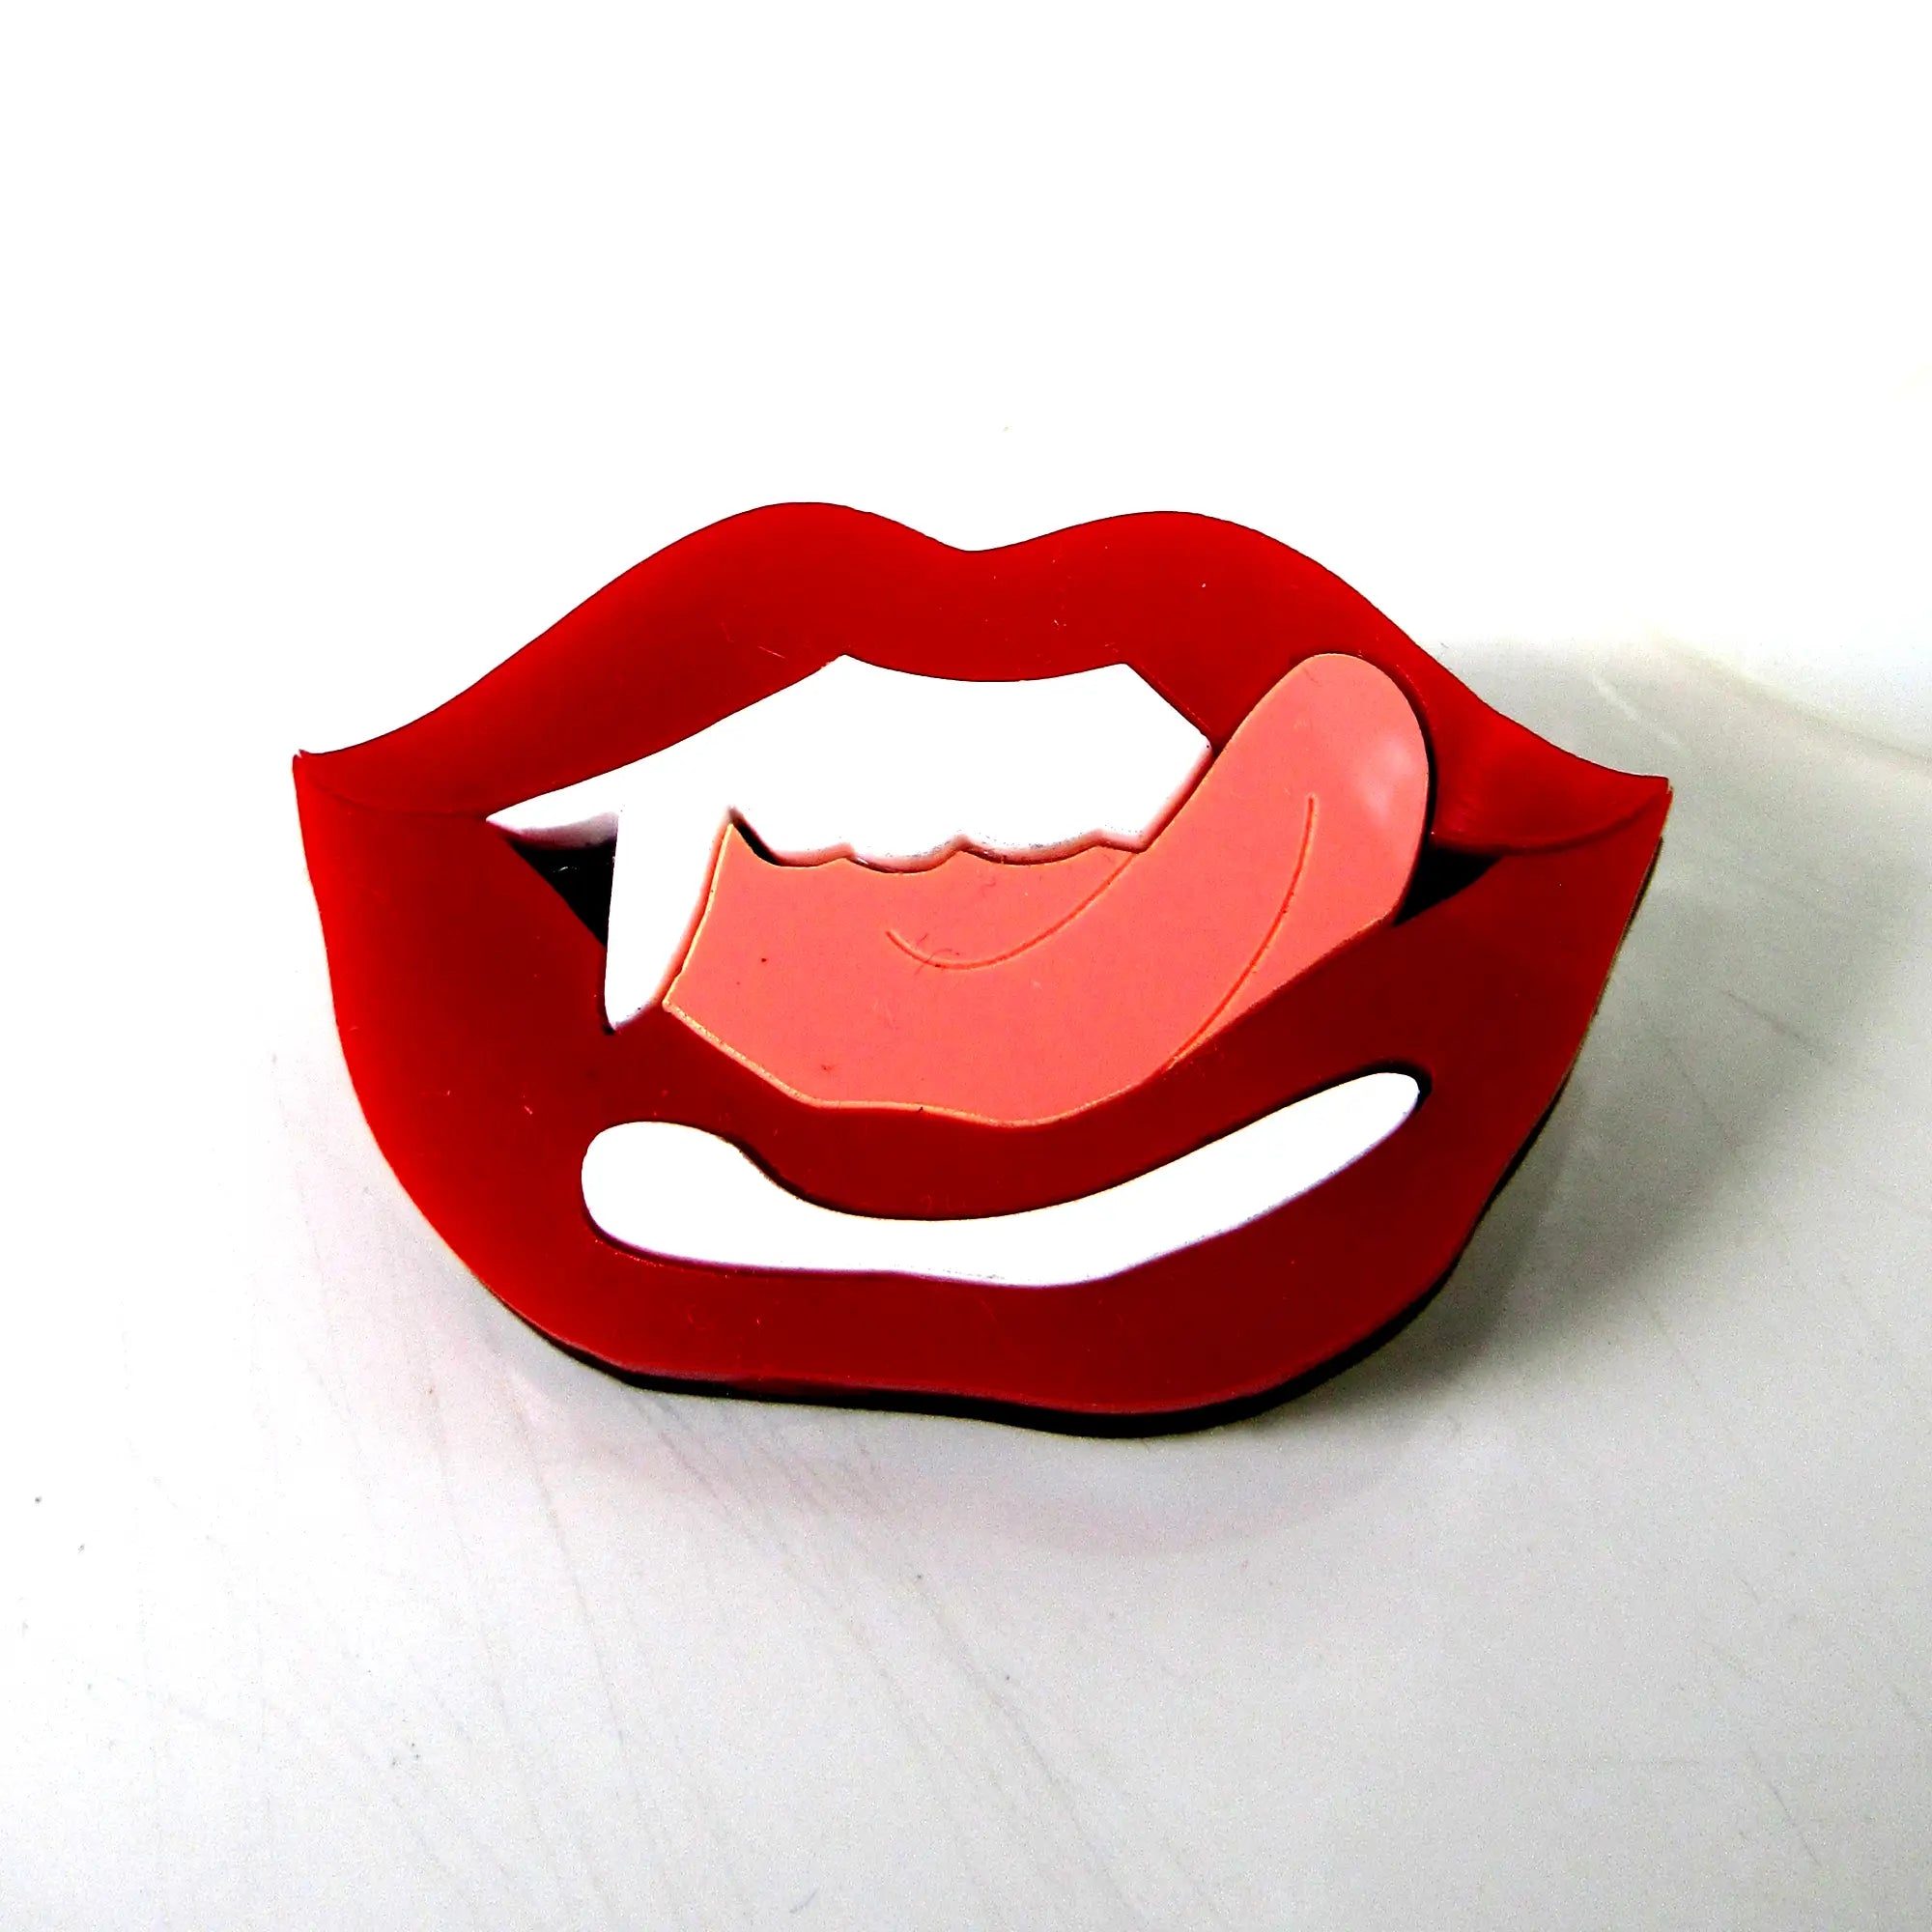 A laser cut layered acrylic brooch of a vampire’s mouth with bared fangs and tongue sticking out